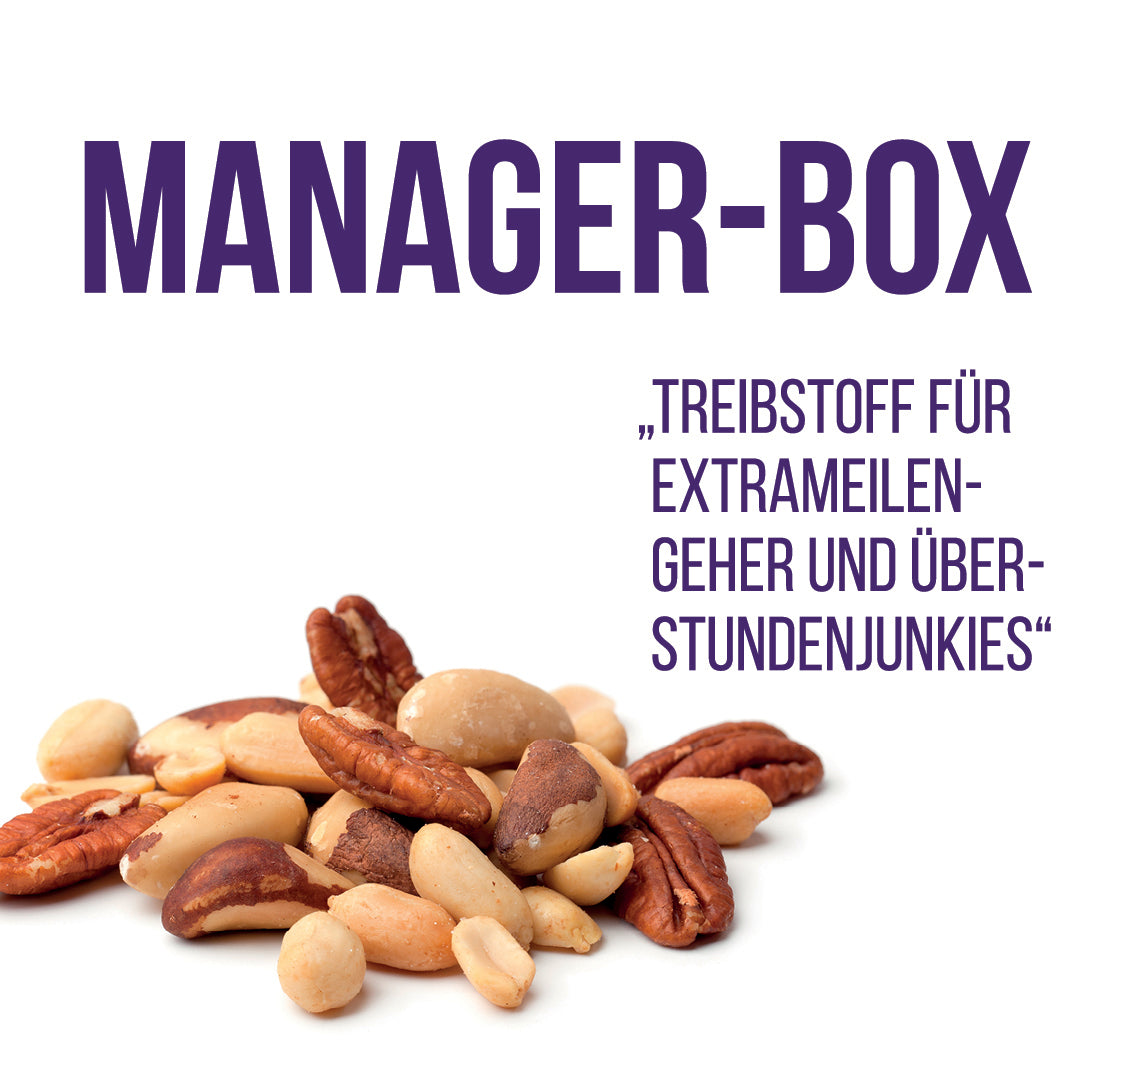 Manager Box